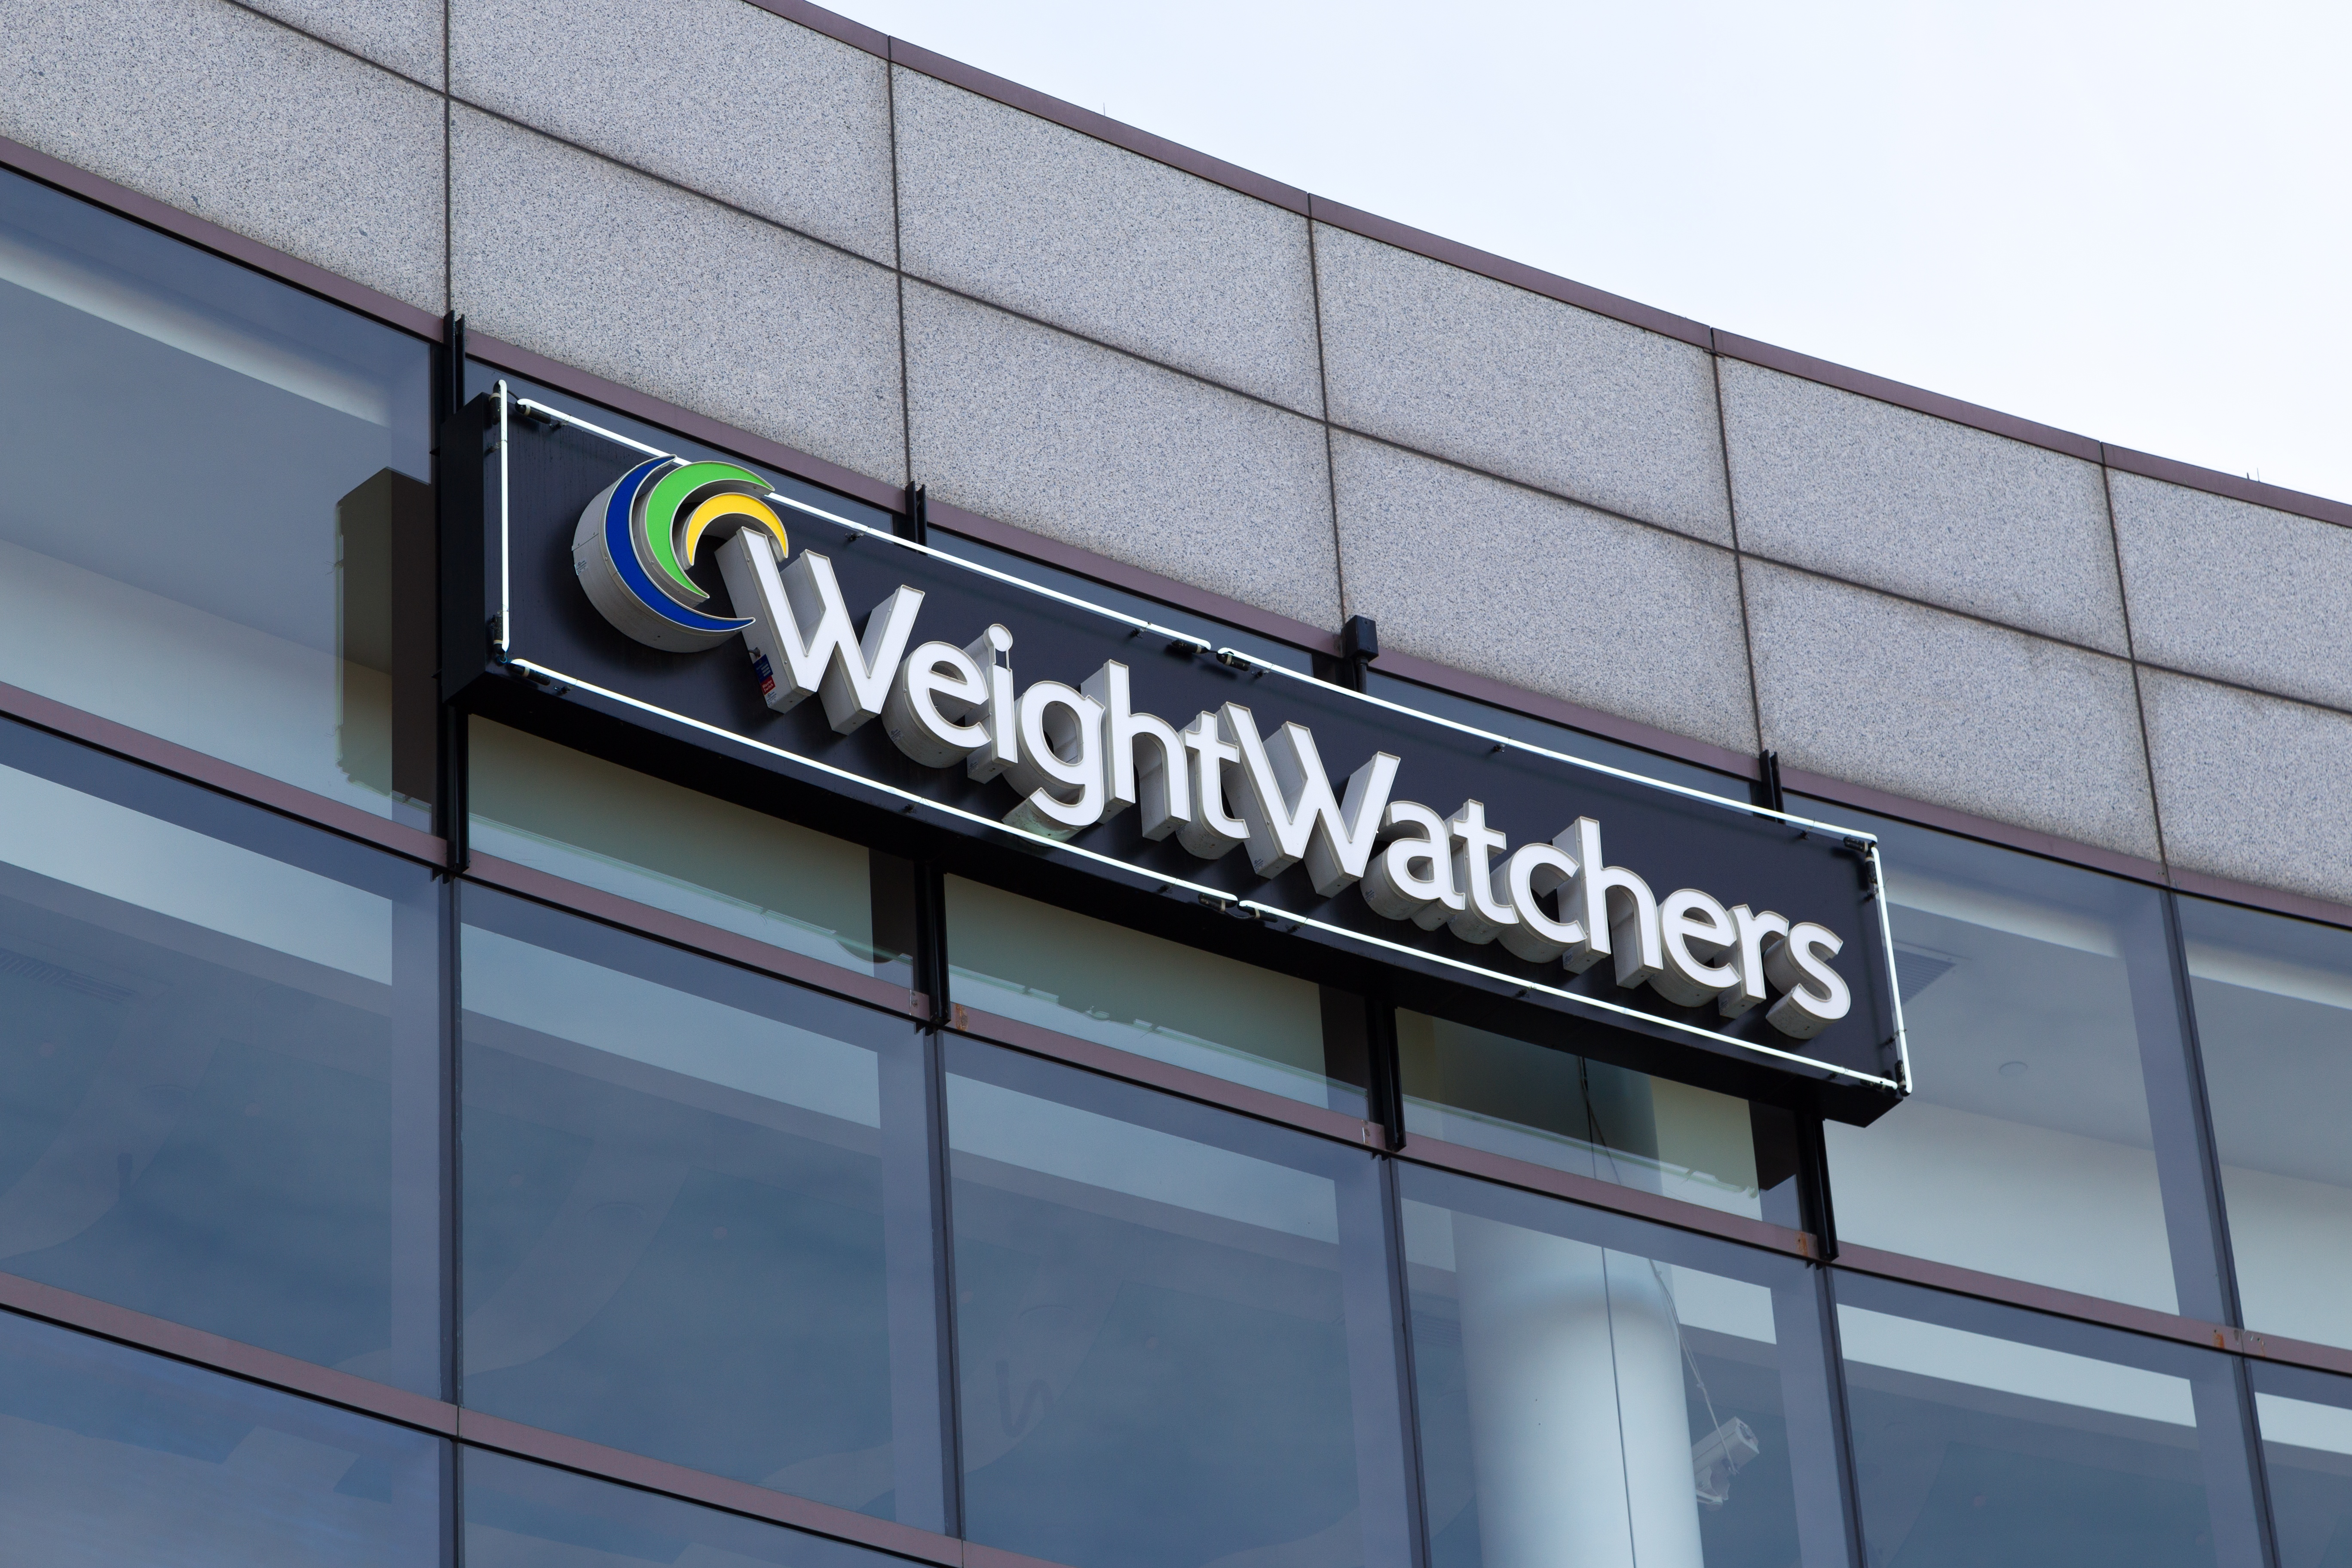 primary market research weight watchers